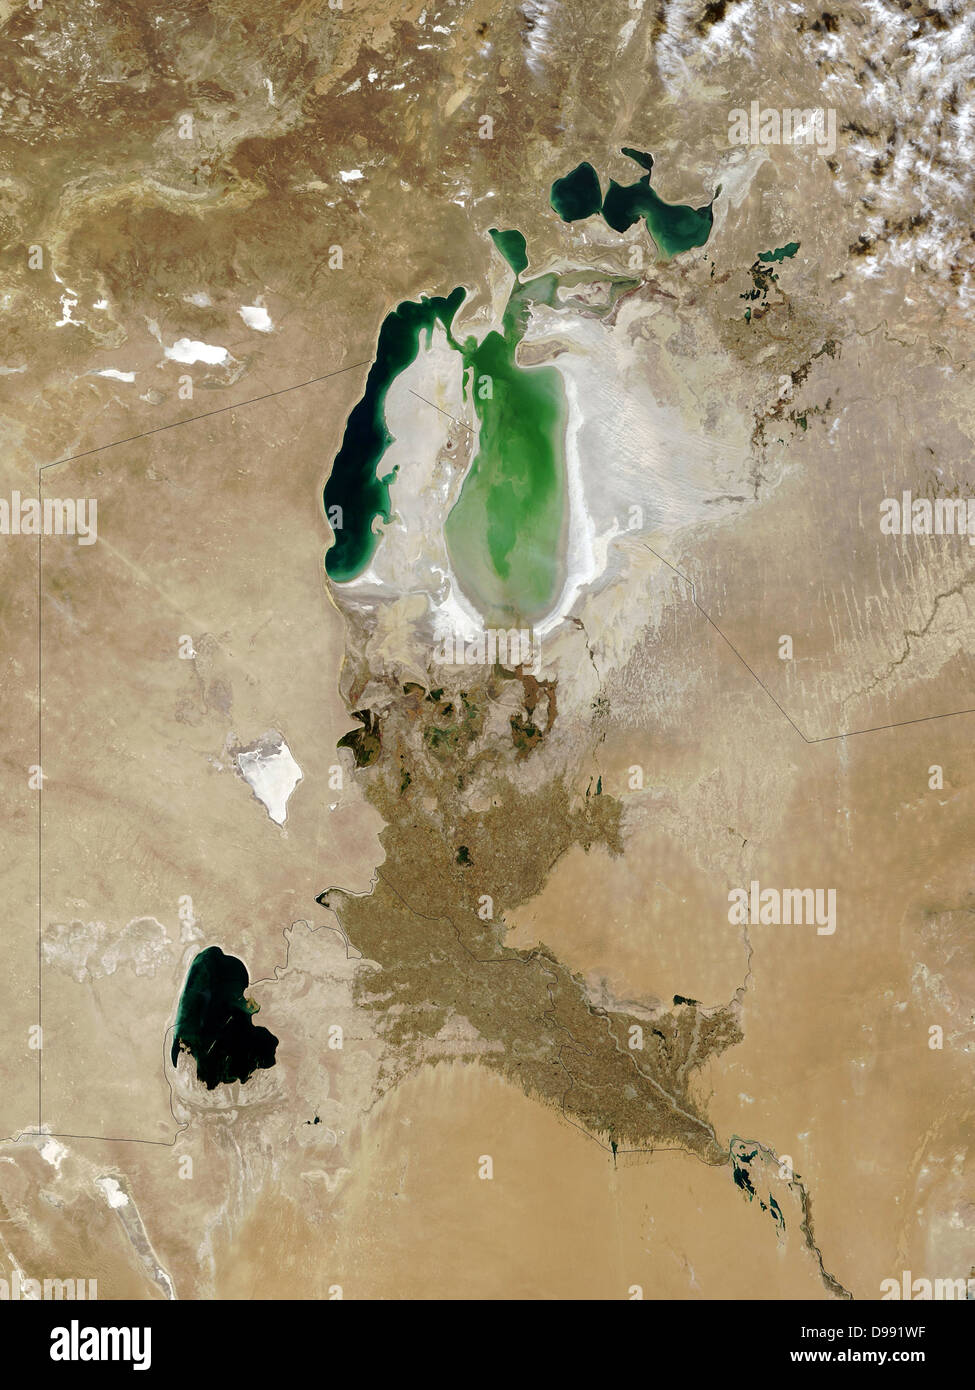 The Aral Sea, October 2008. Once fourth largest inland sea, in southern Kazakhstan and northern Uzbekistan it has divided into three bodies of water. Major cause of shrinkage due to diversion of water to agriculture. Credit NASA. Stock Photo